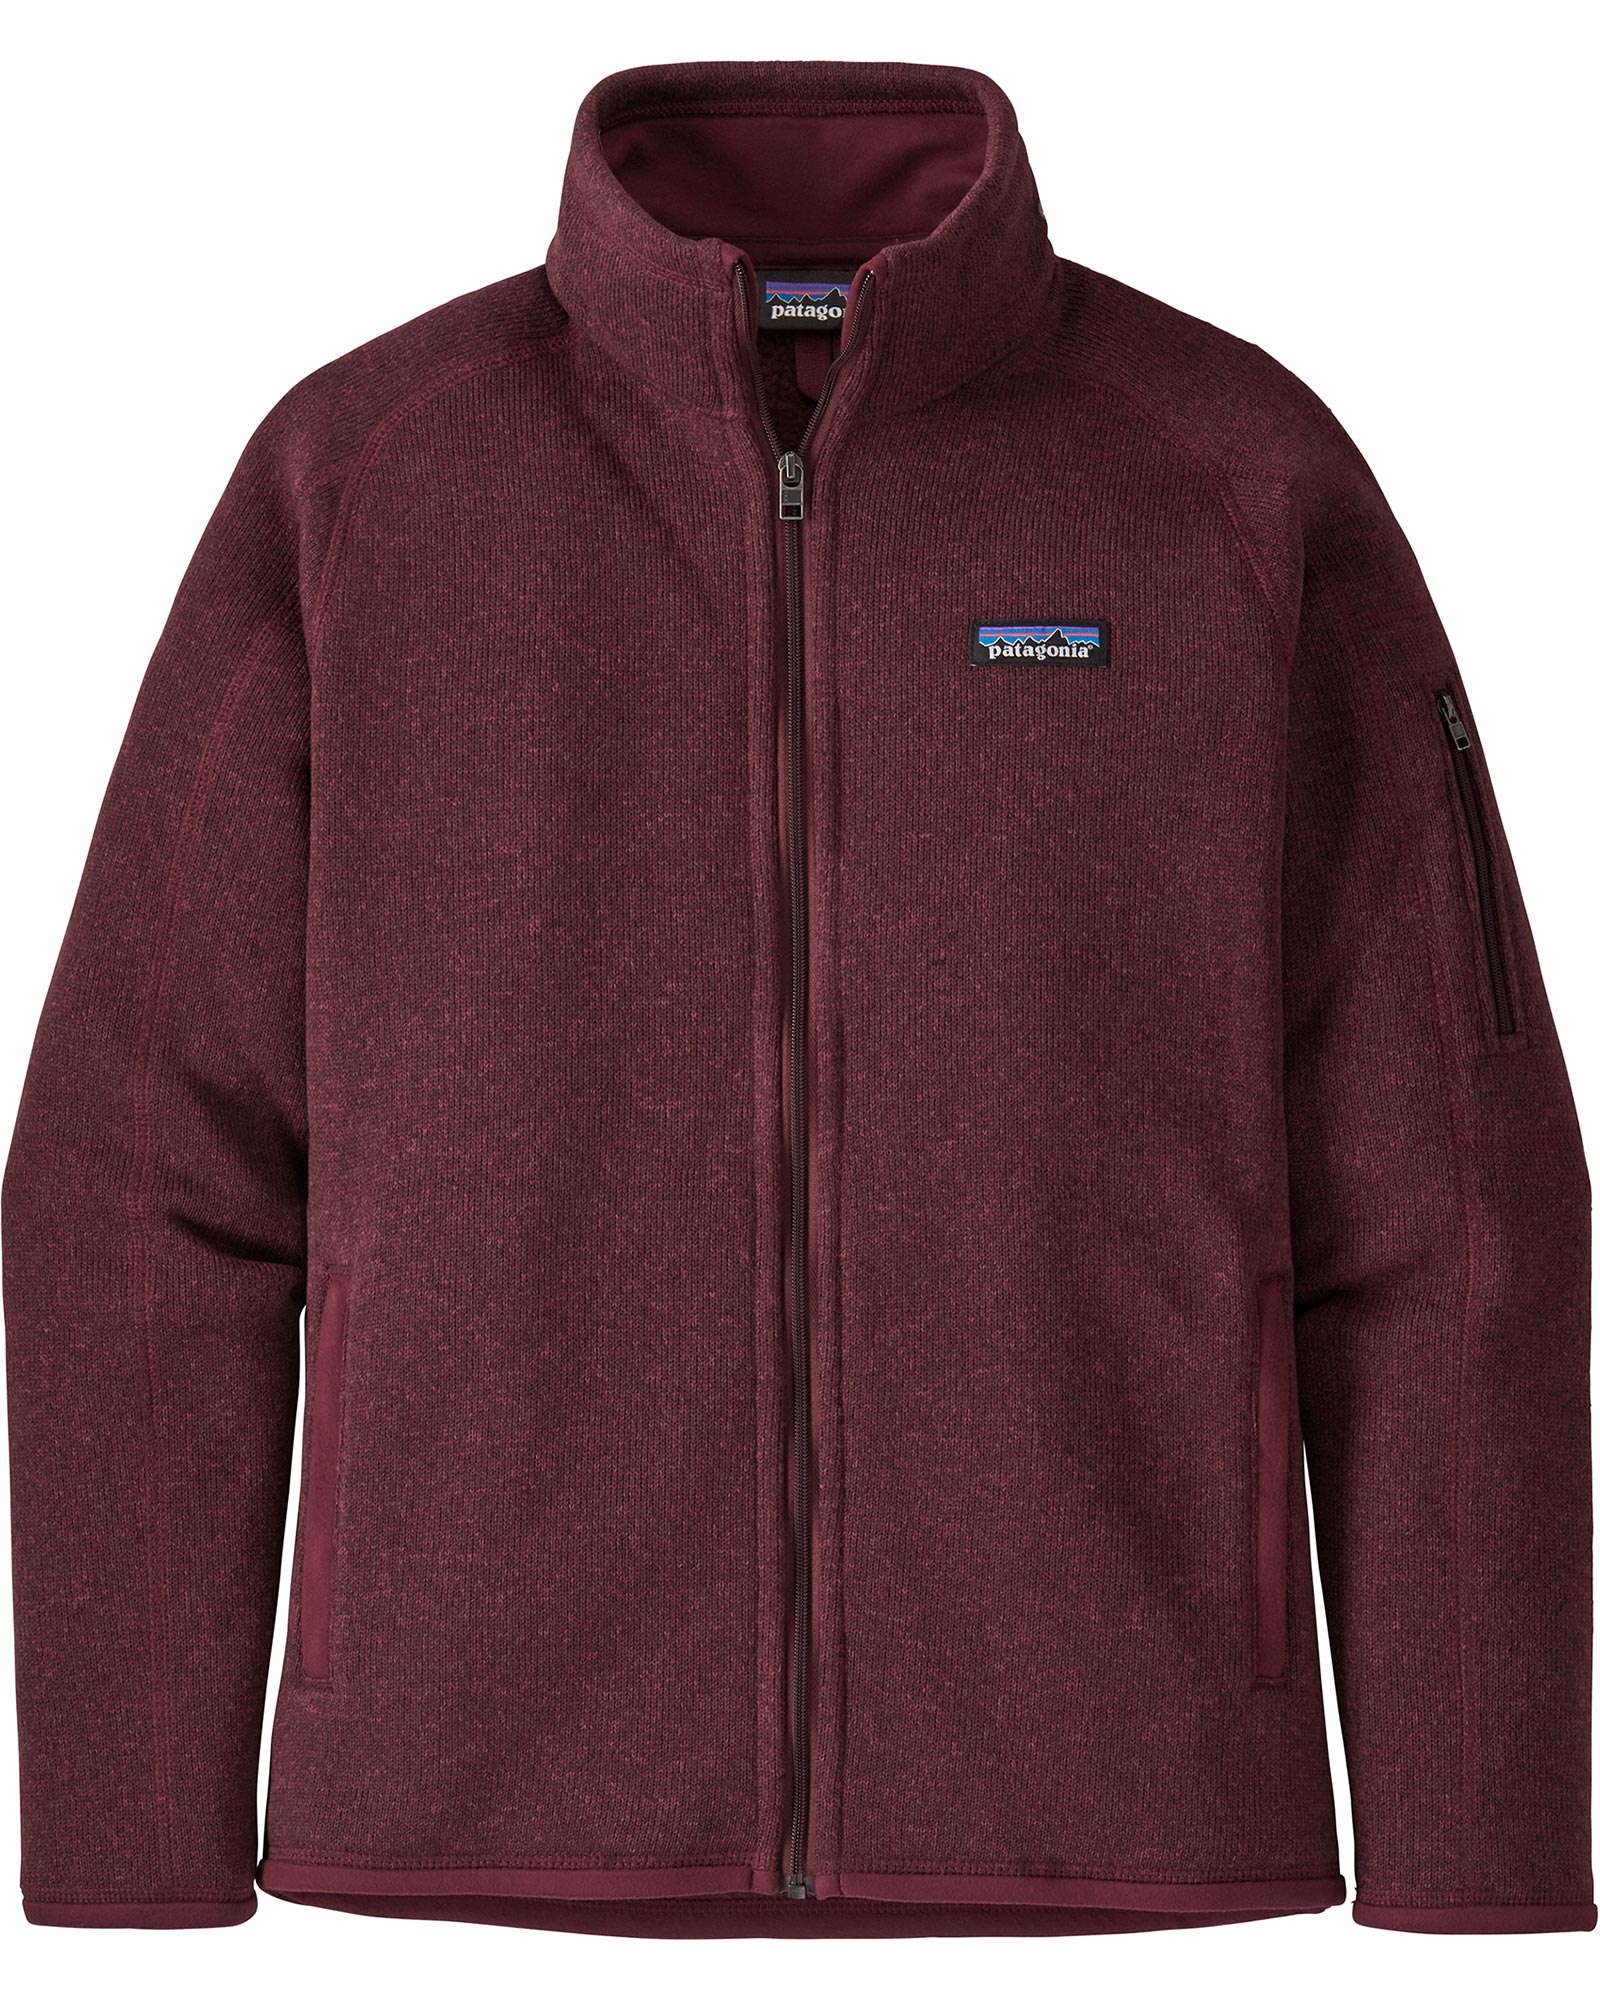 Patagonia Better Sweater Women’s Jacket - Chicory Red L